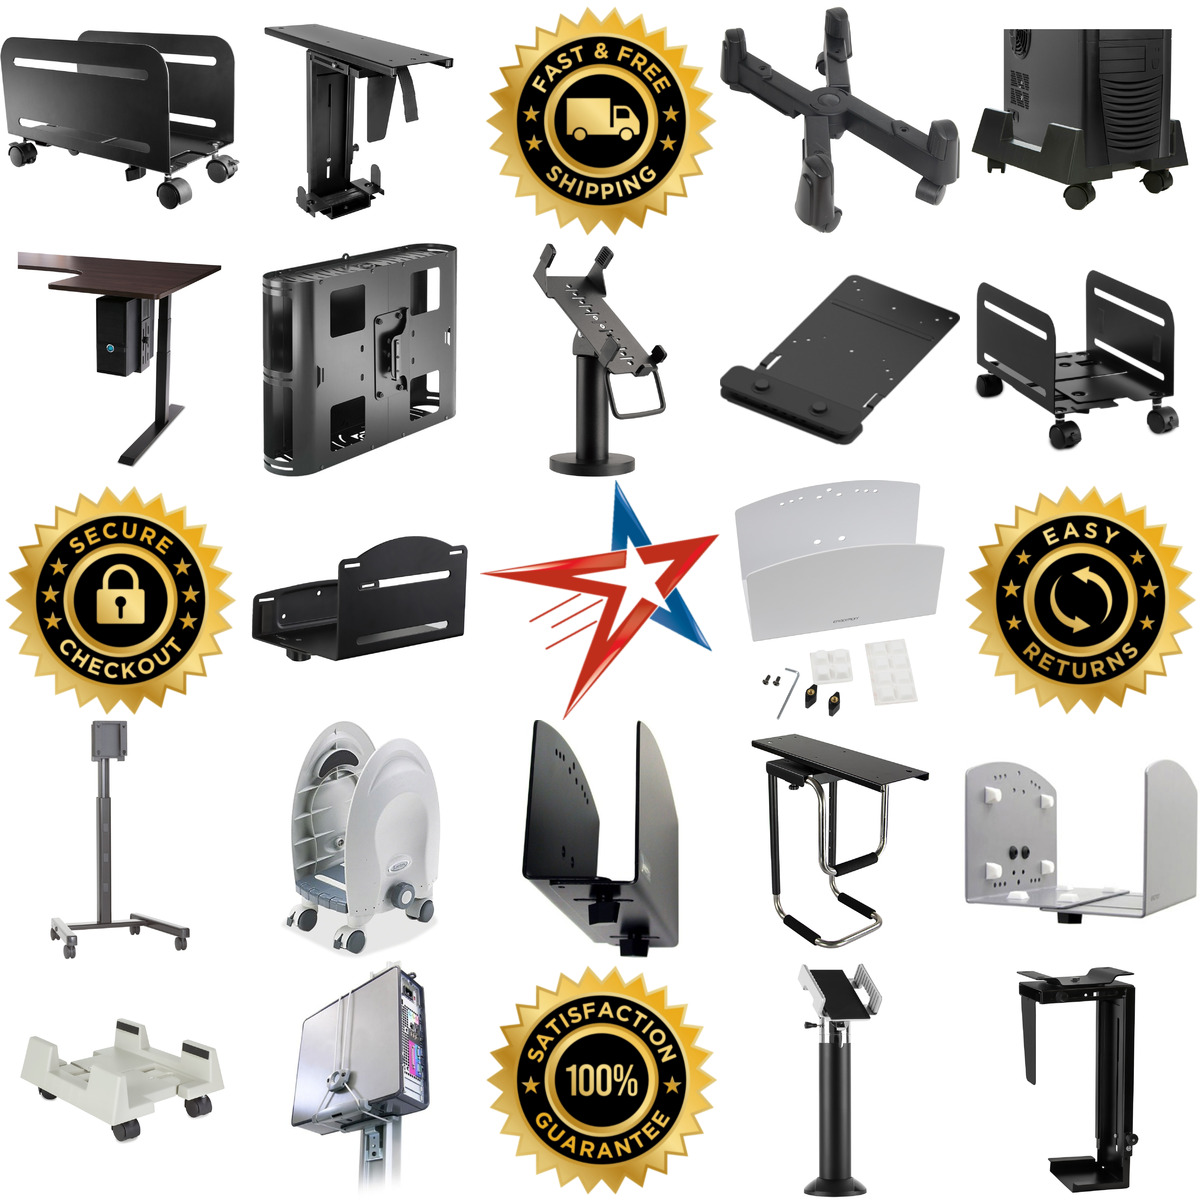 A selection of Cpu Stands products on GoVets